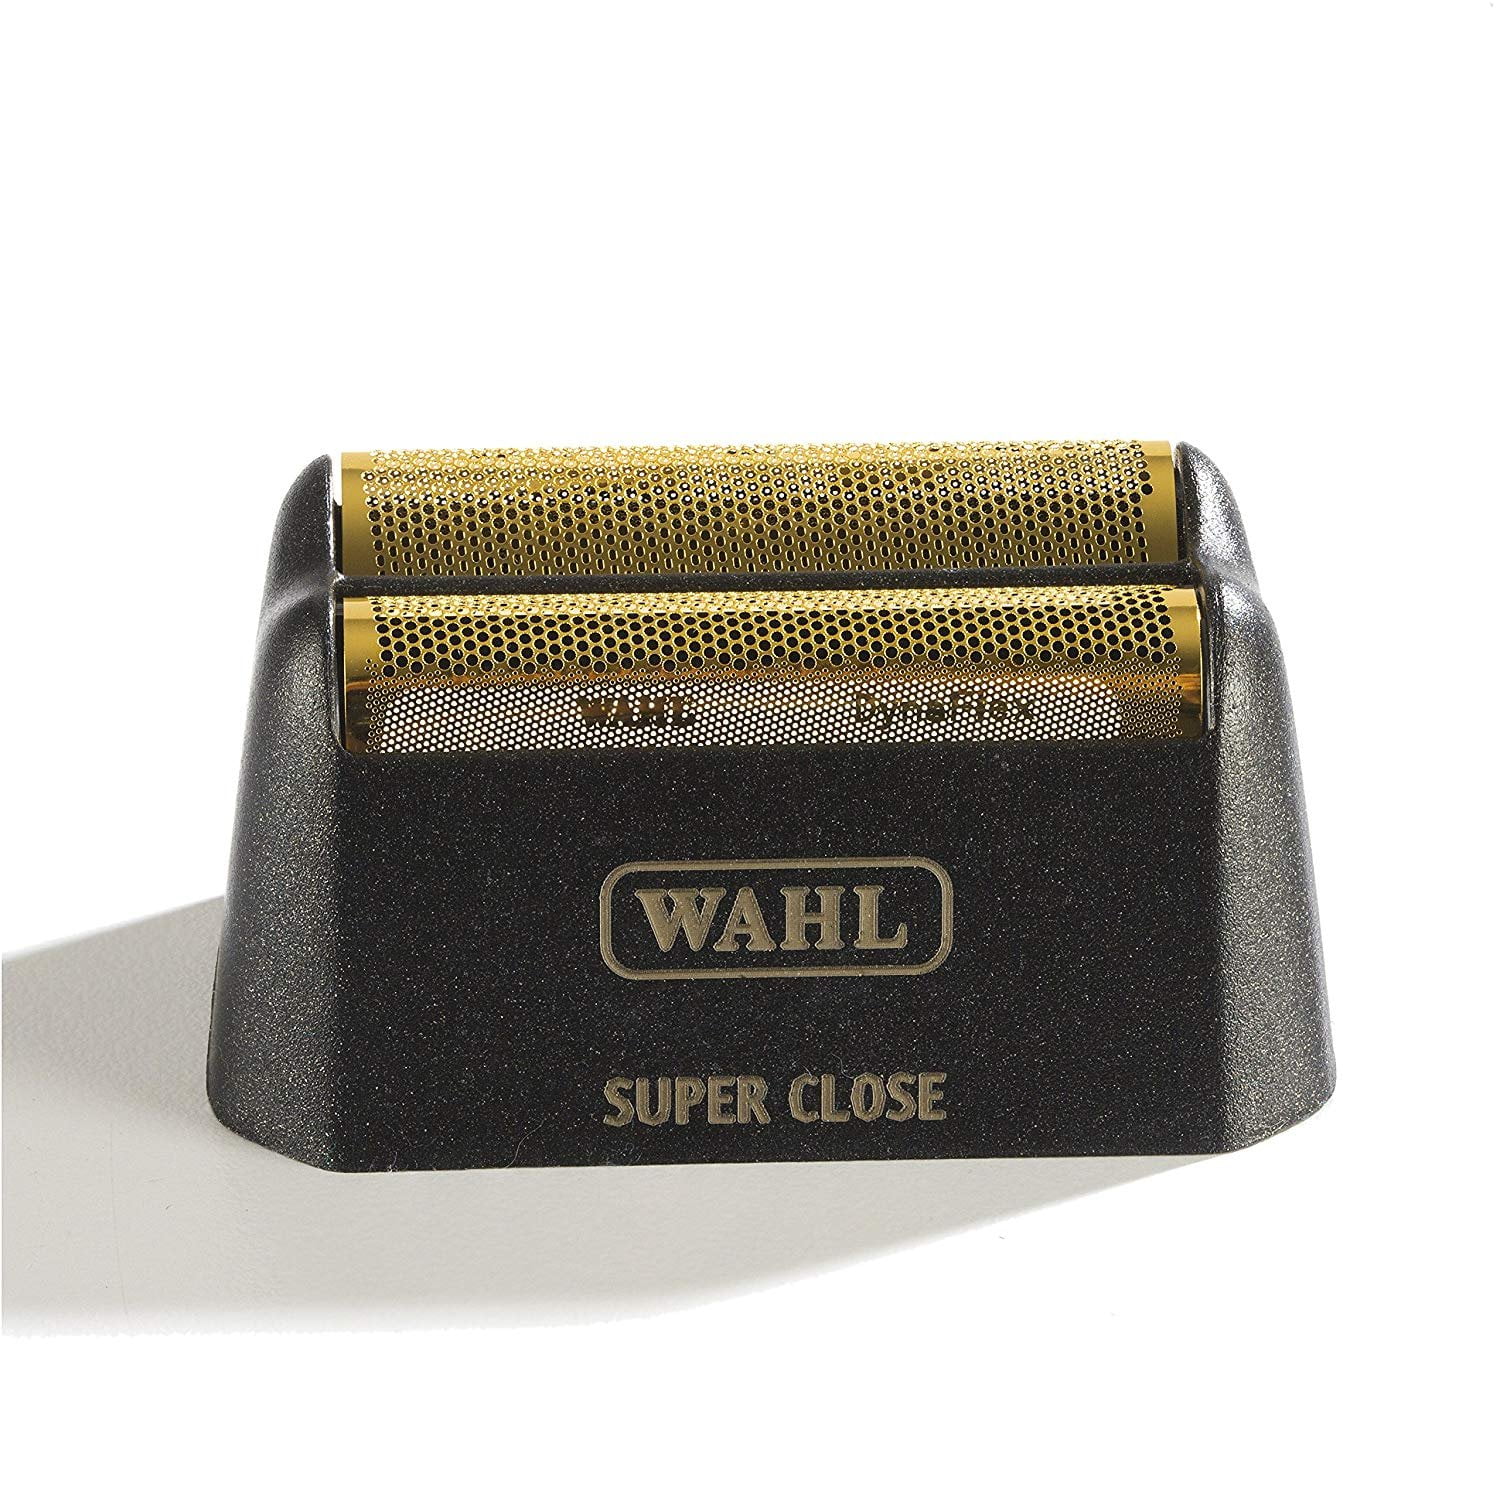 wahl replacement foil & cutter bar assembly